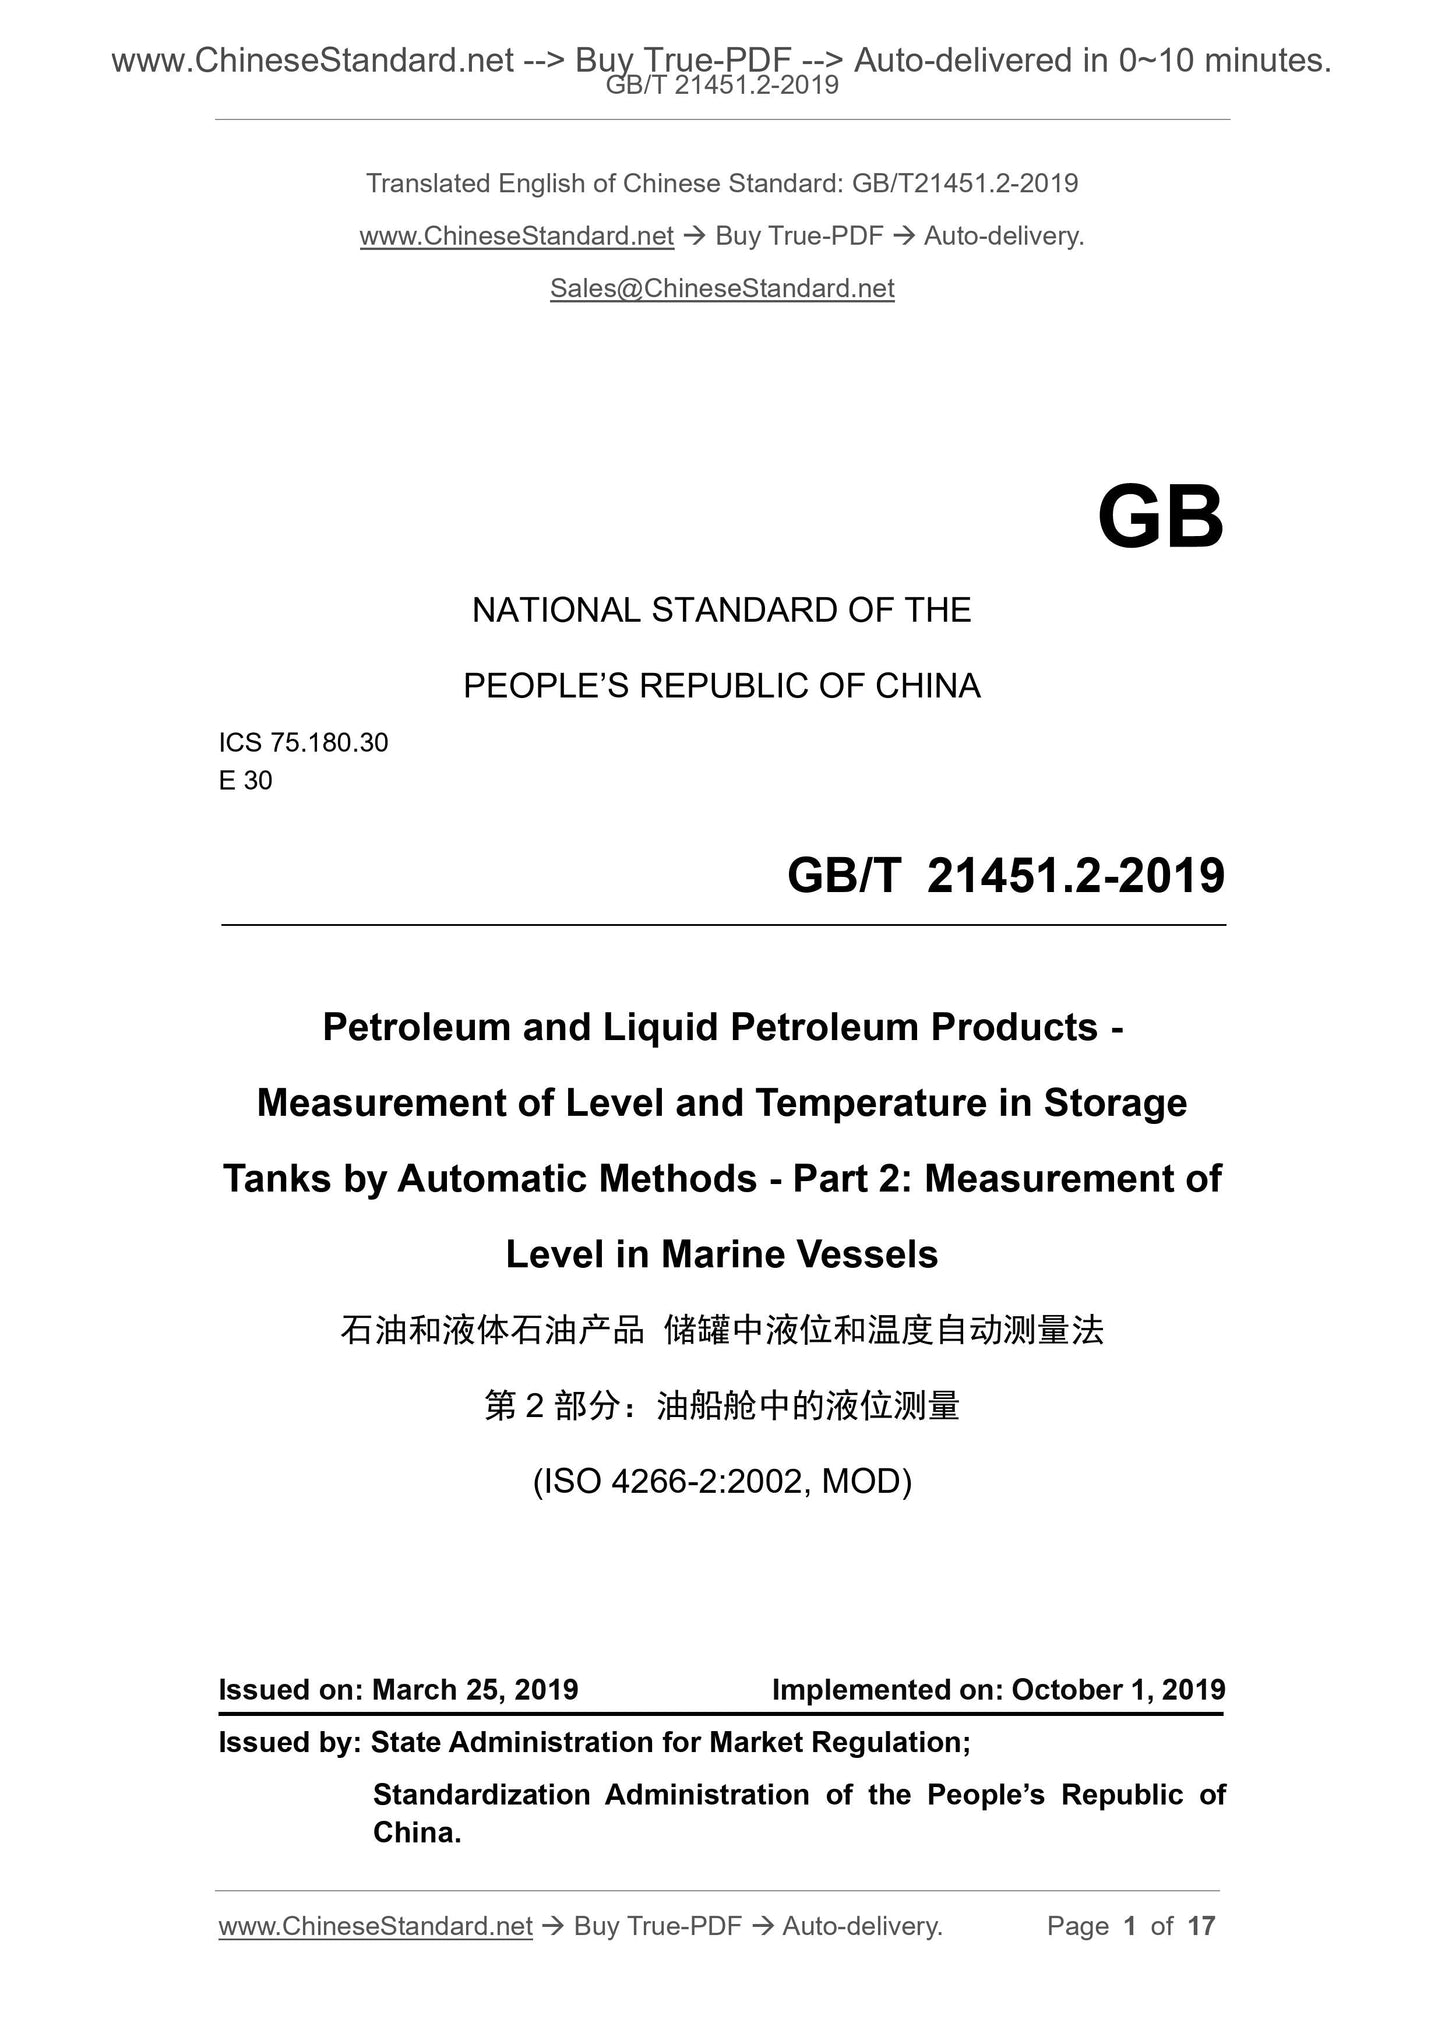 GB/T 21451.2-2019 Page 1